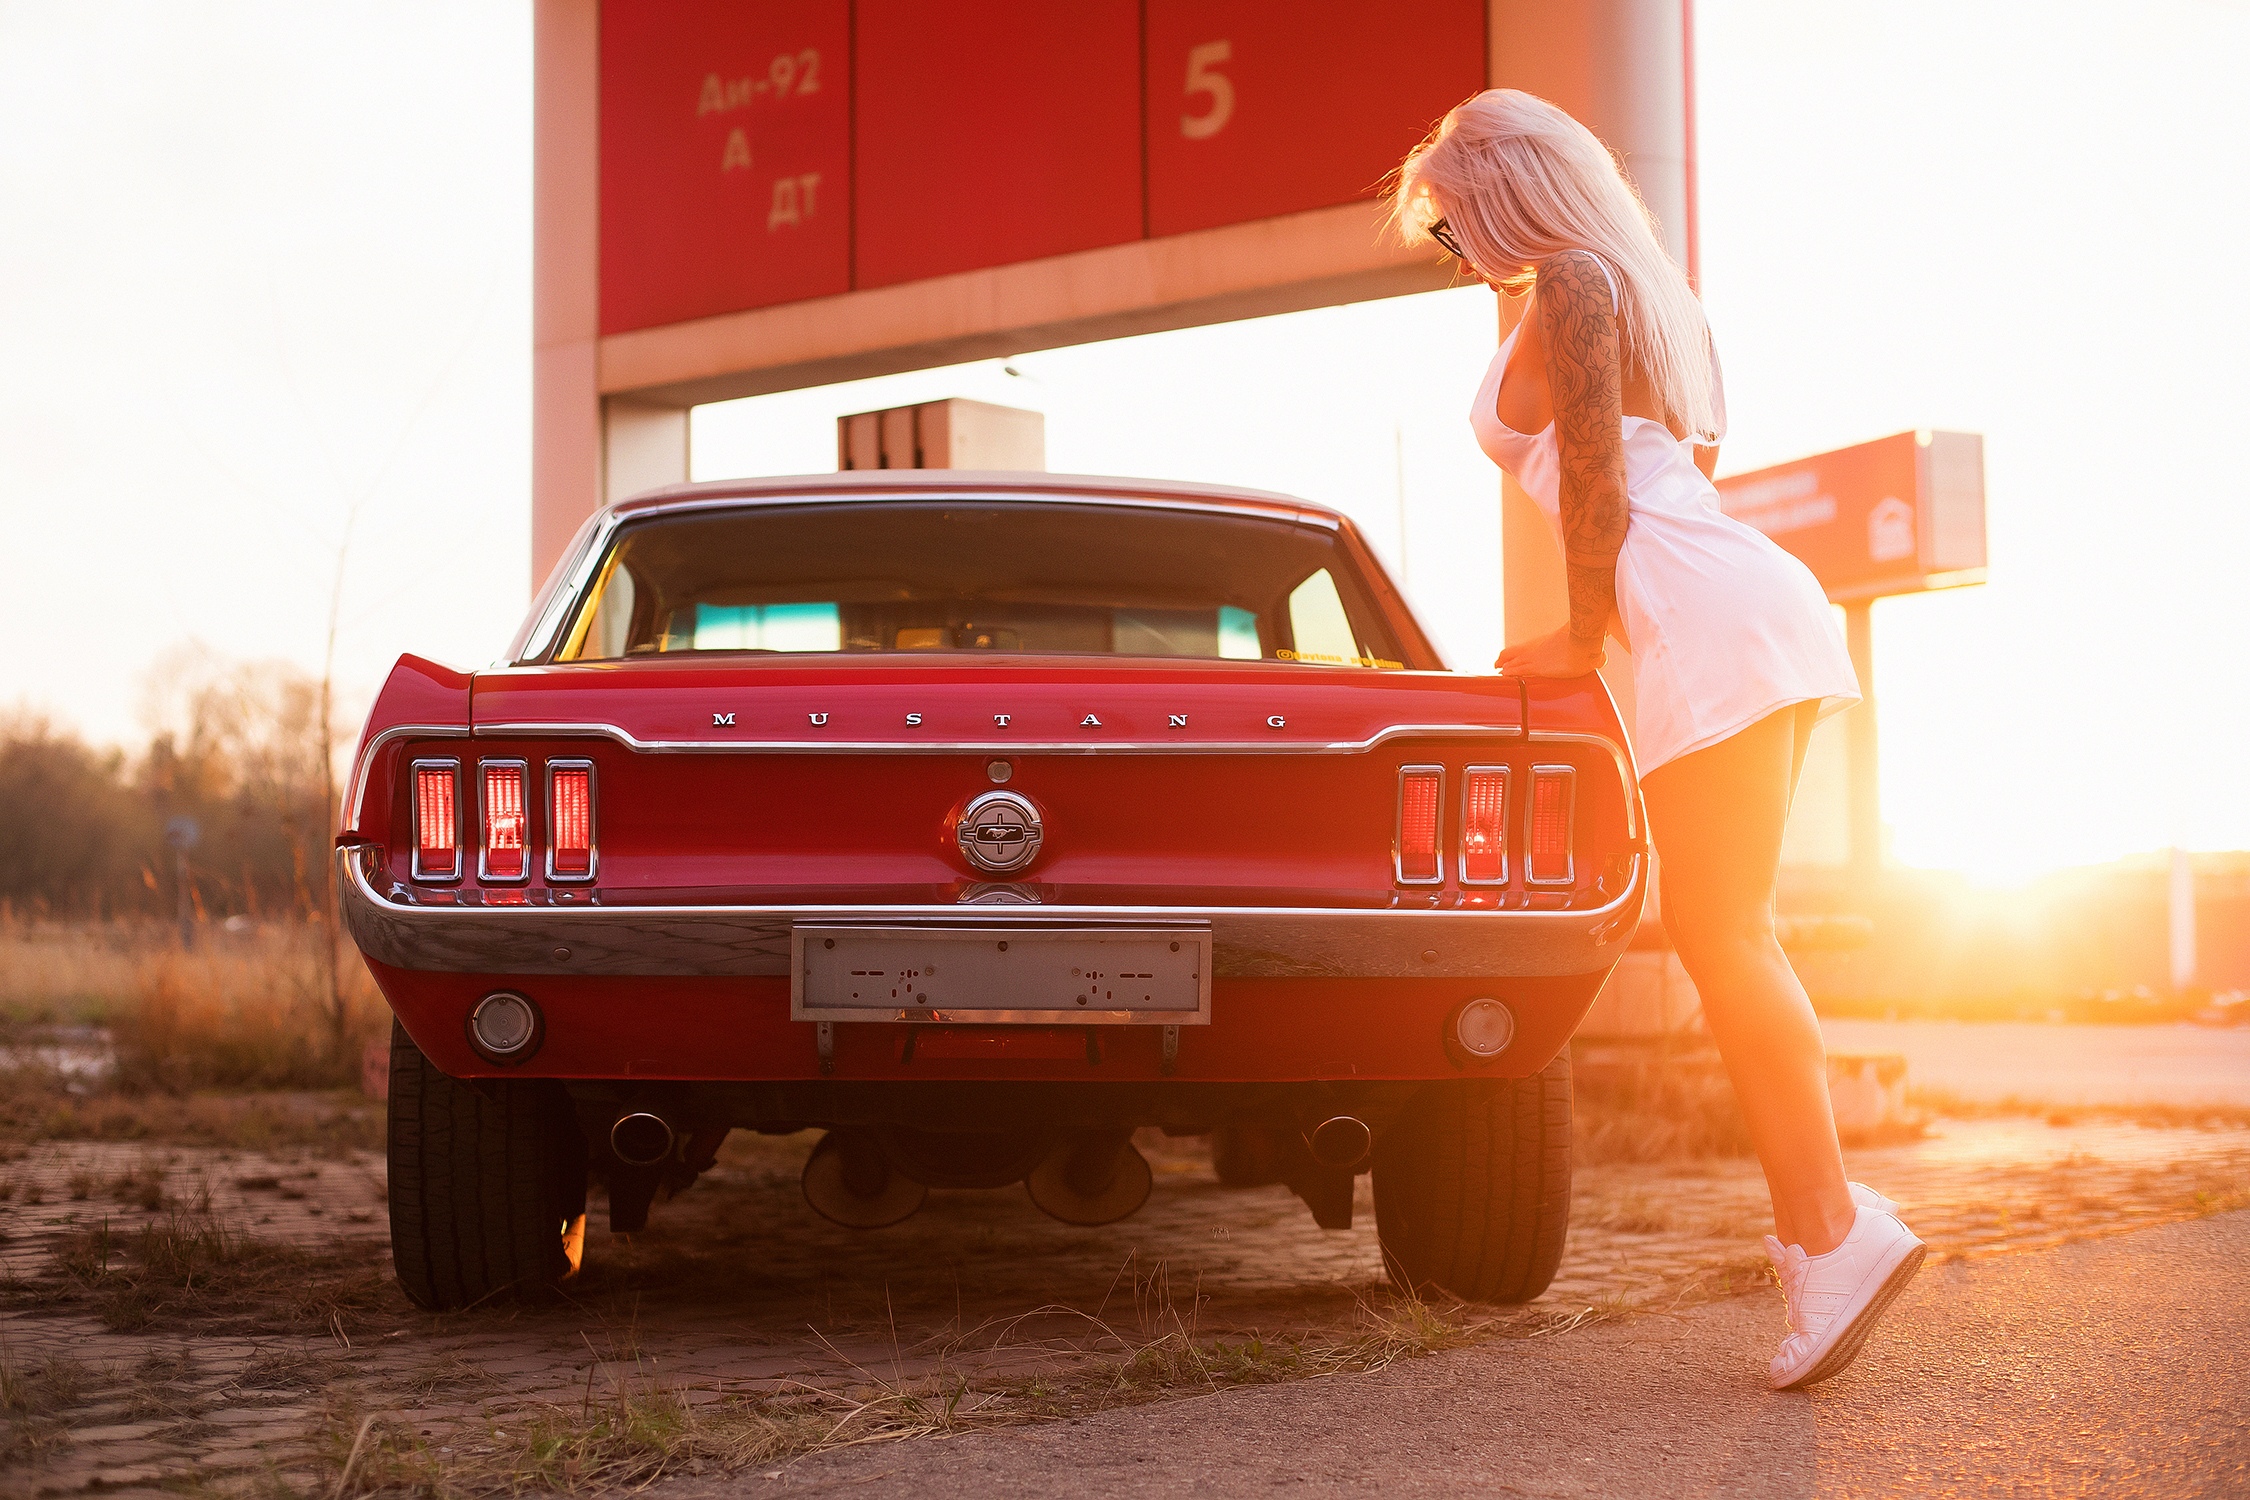 Women Model Blonde Women Outdoors Ford Mustang Muscle Cars Red Cars Classic Car Tattoo White Dress D 2250x1500